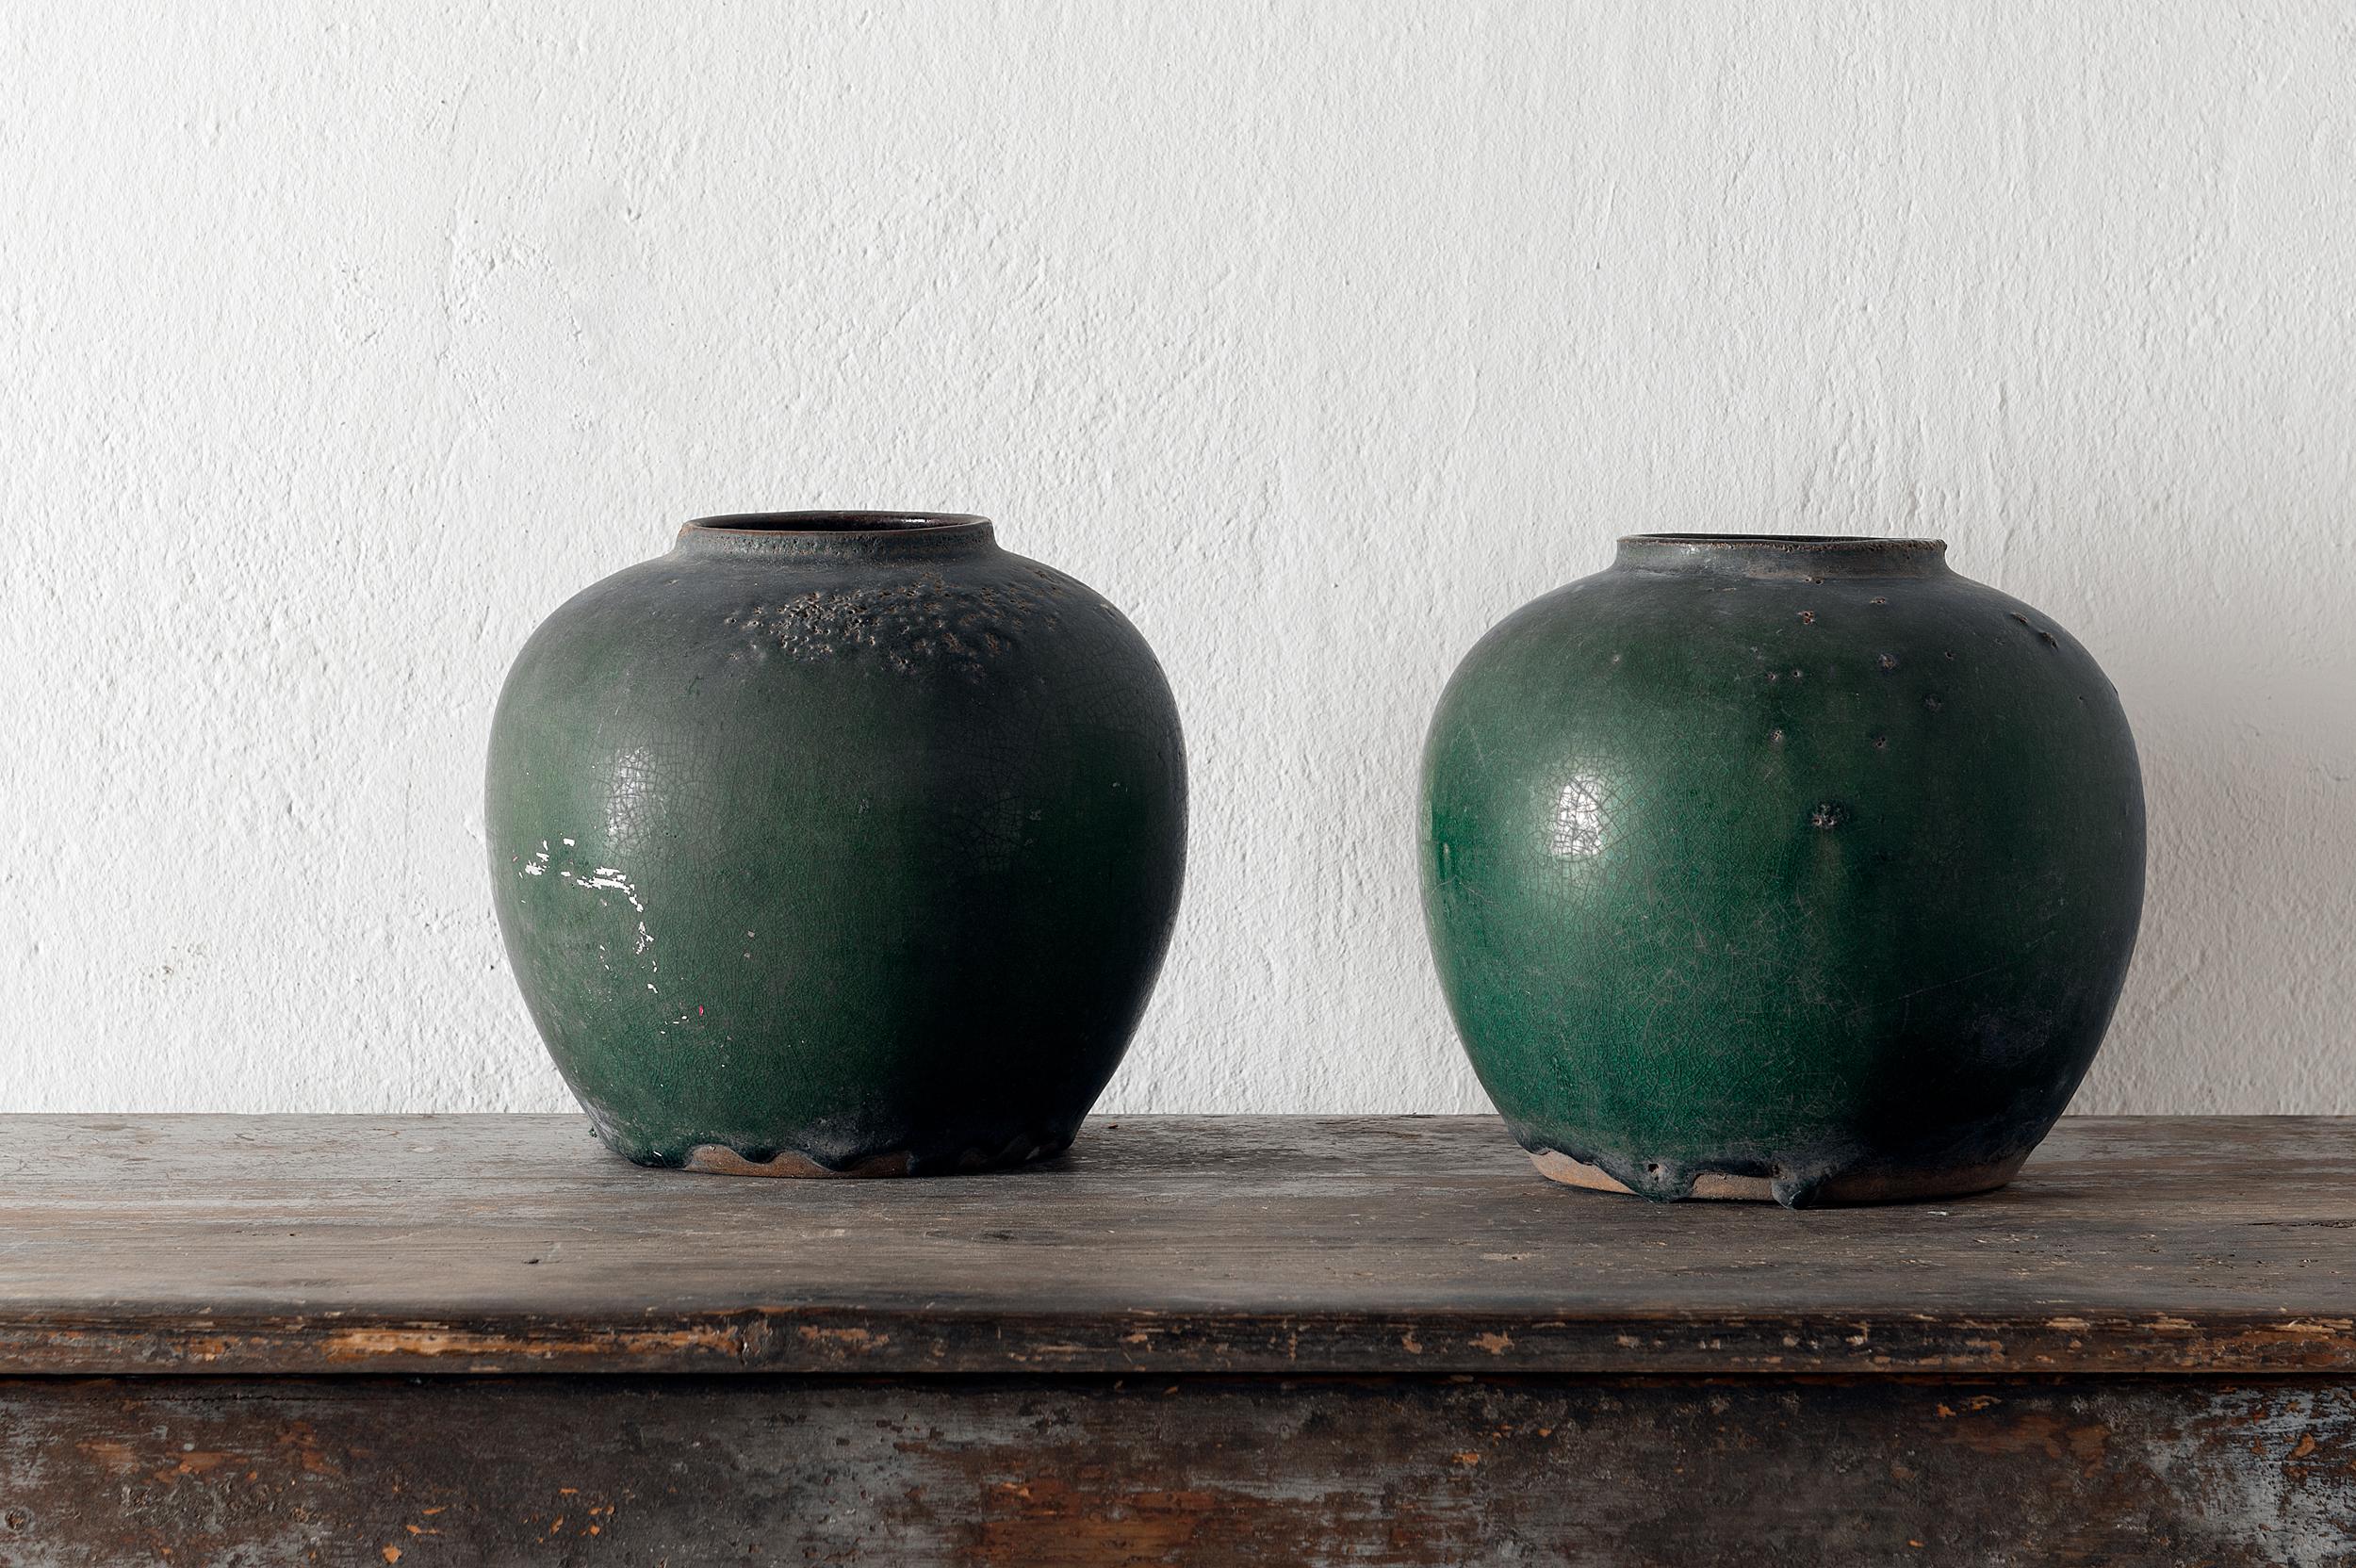 Set of circa 1880 Chinese celadon glazed pots. Great decoration or layering pieces.